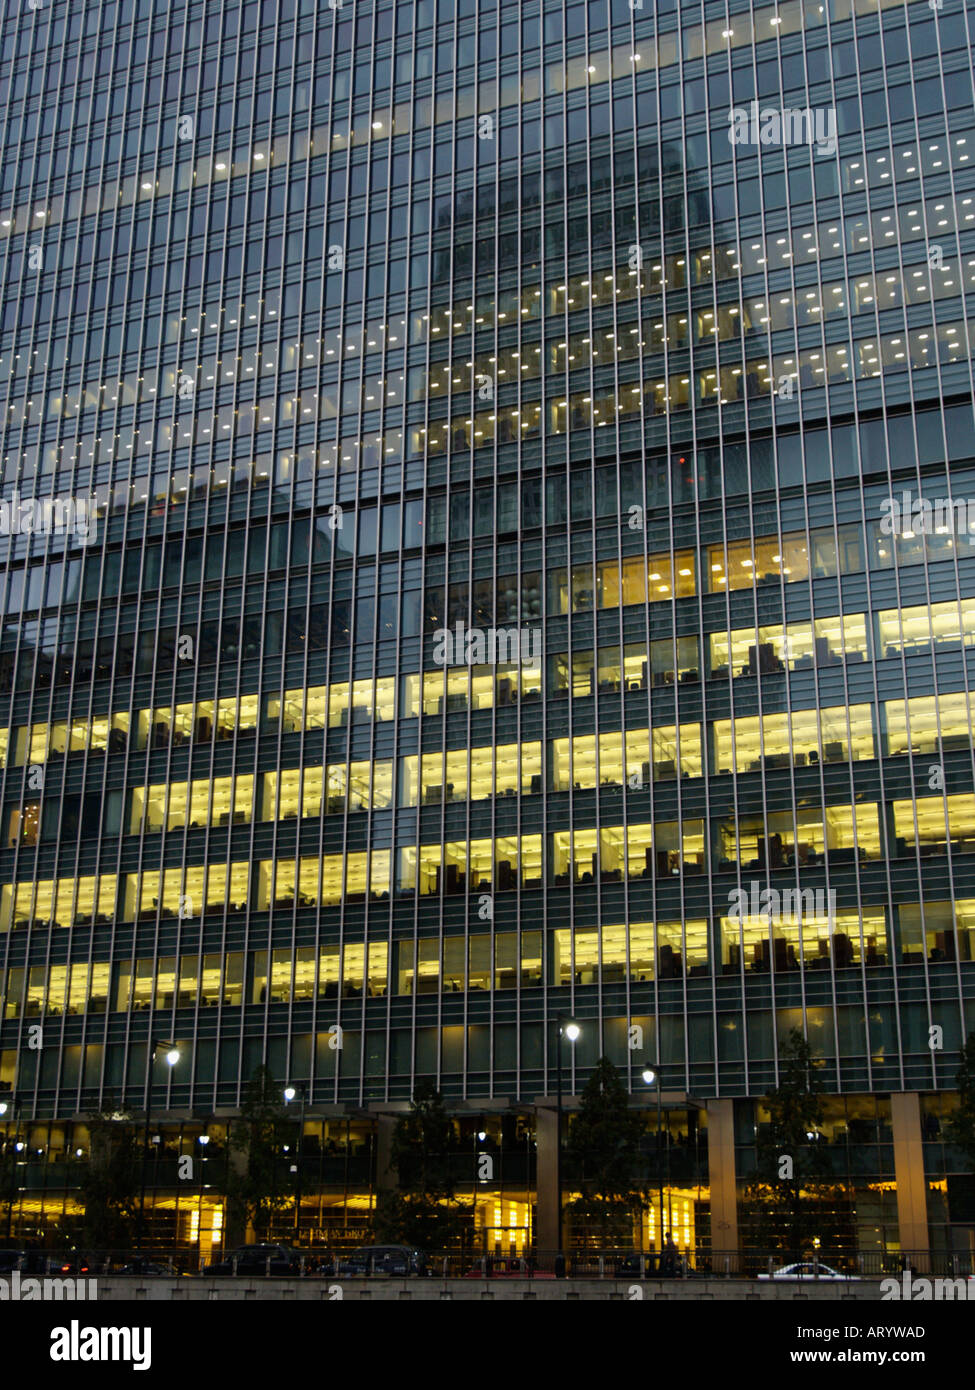 Office building reflections, Lehman Brothers, Docklands Canary Wharf London UK Banque D'Images